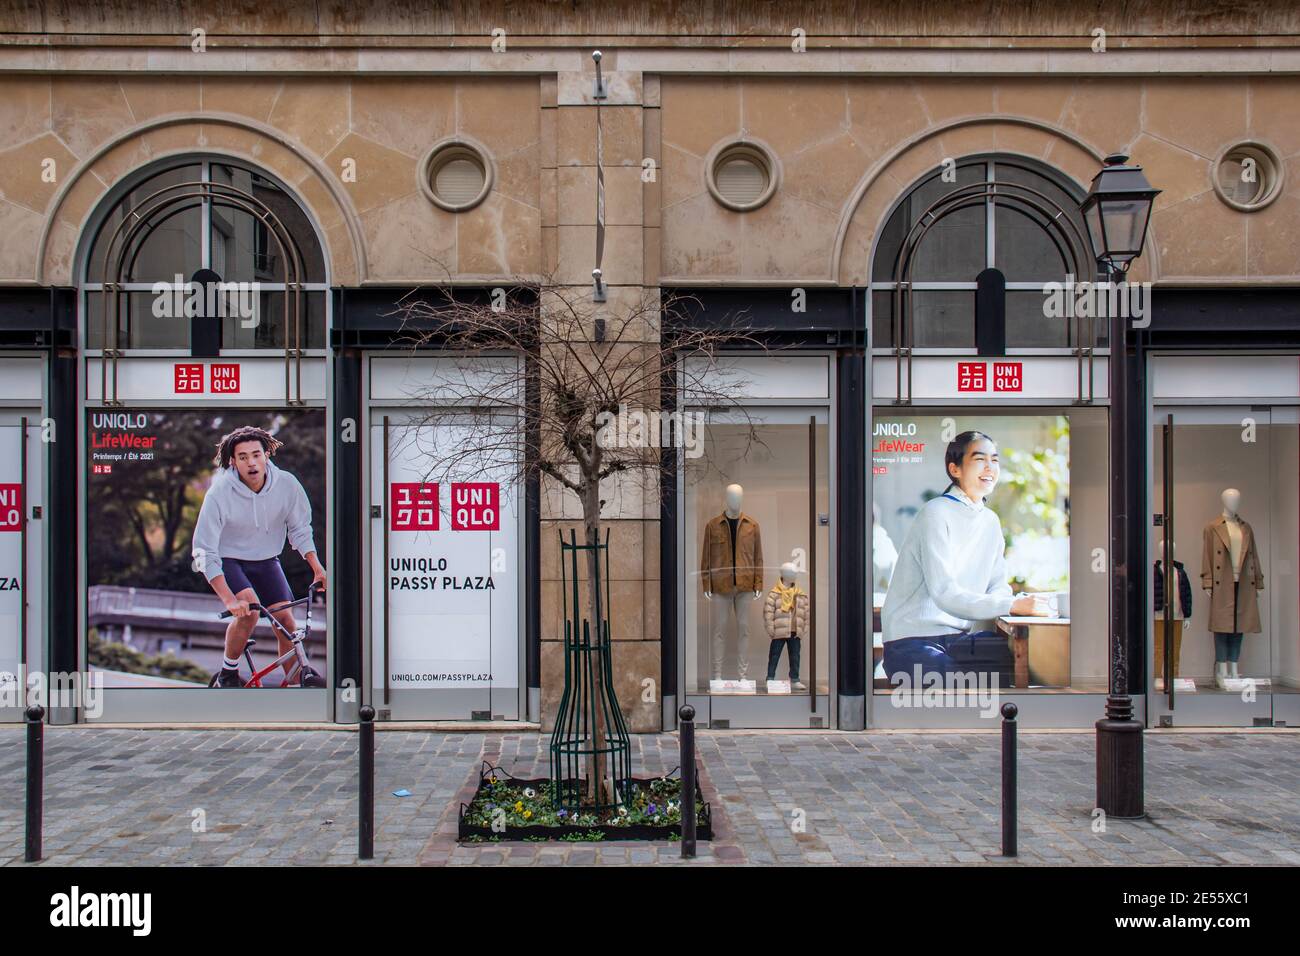 French Logo of UNIQLO brand store shop in PASSY PLAZA, Paris, France,  25.1.2021 Famous facade of the japanese style clothing shop Stock Photo -  Alamy